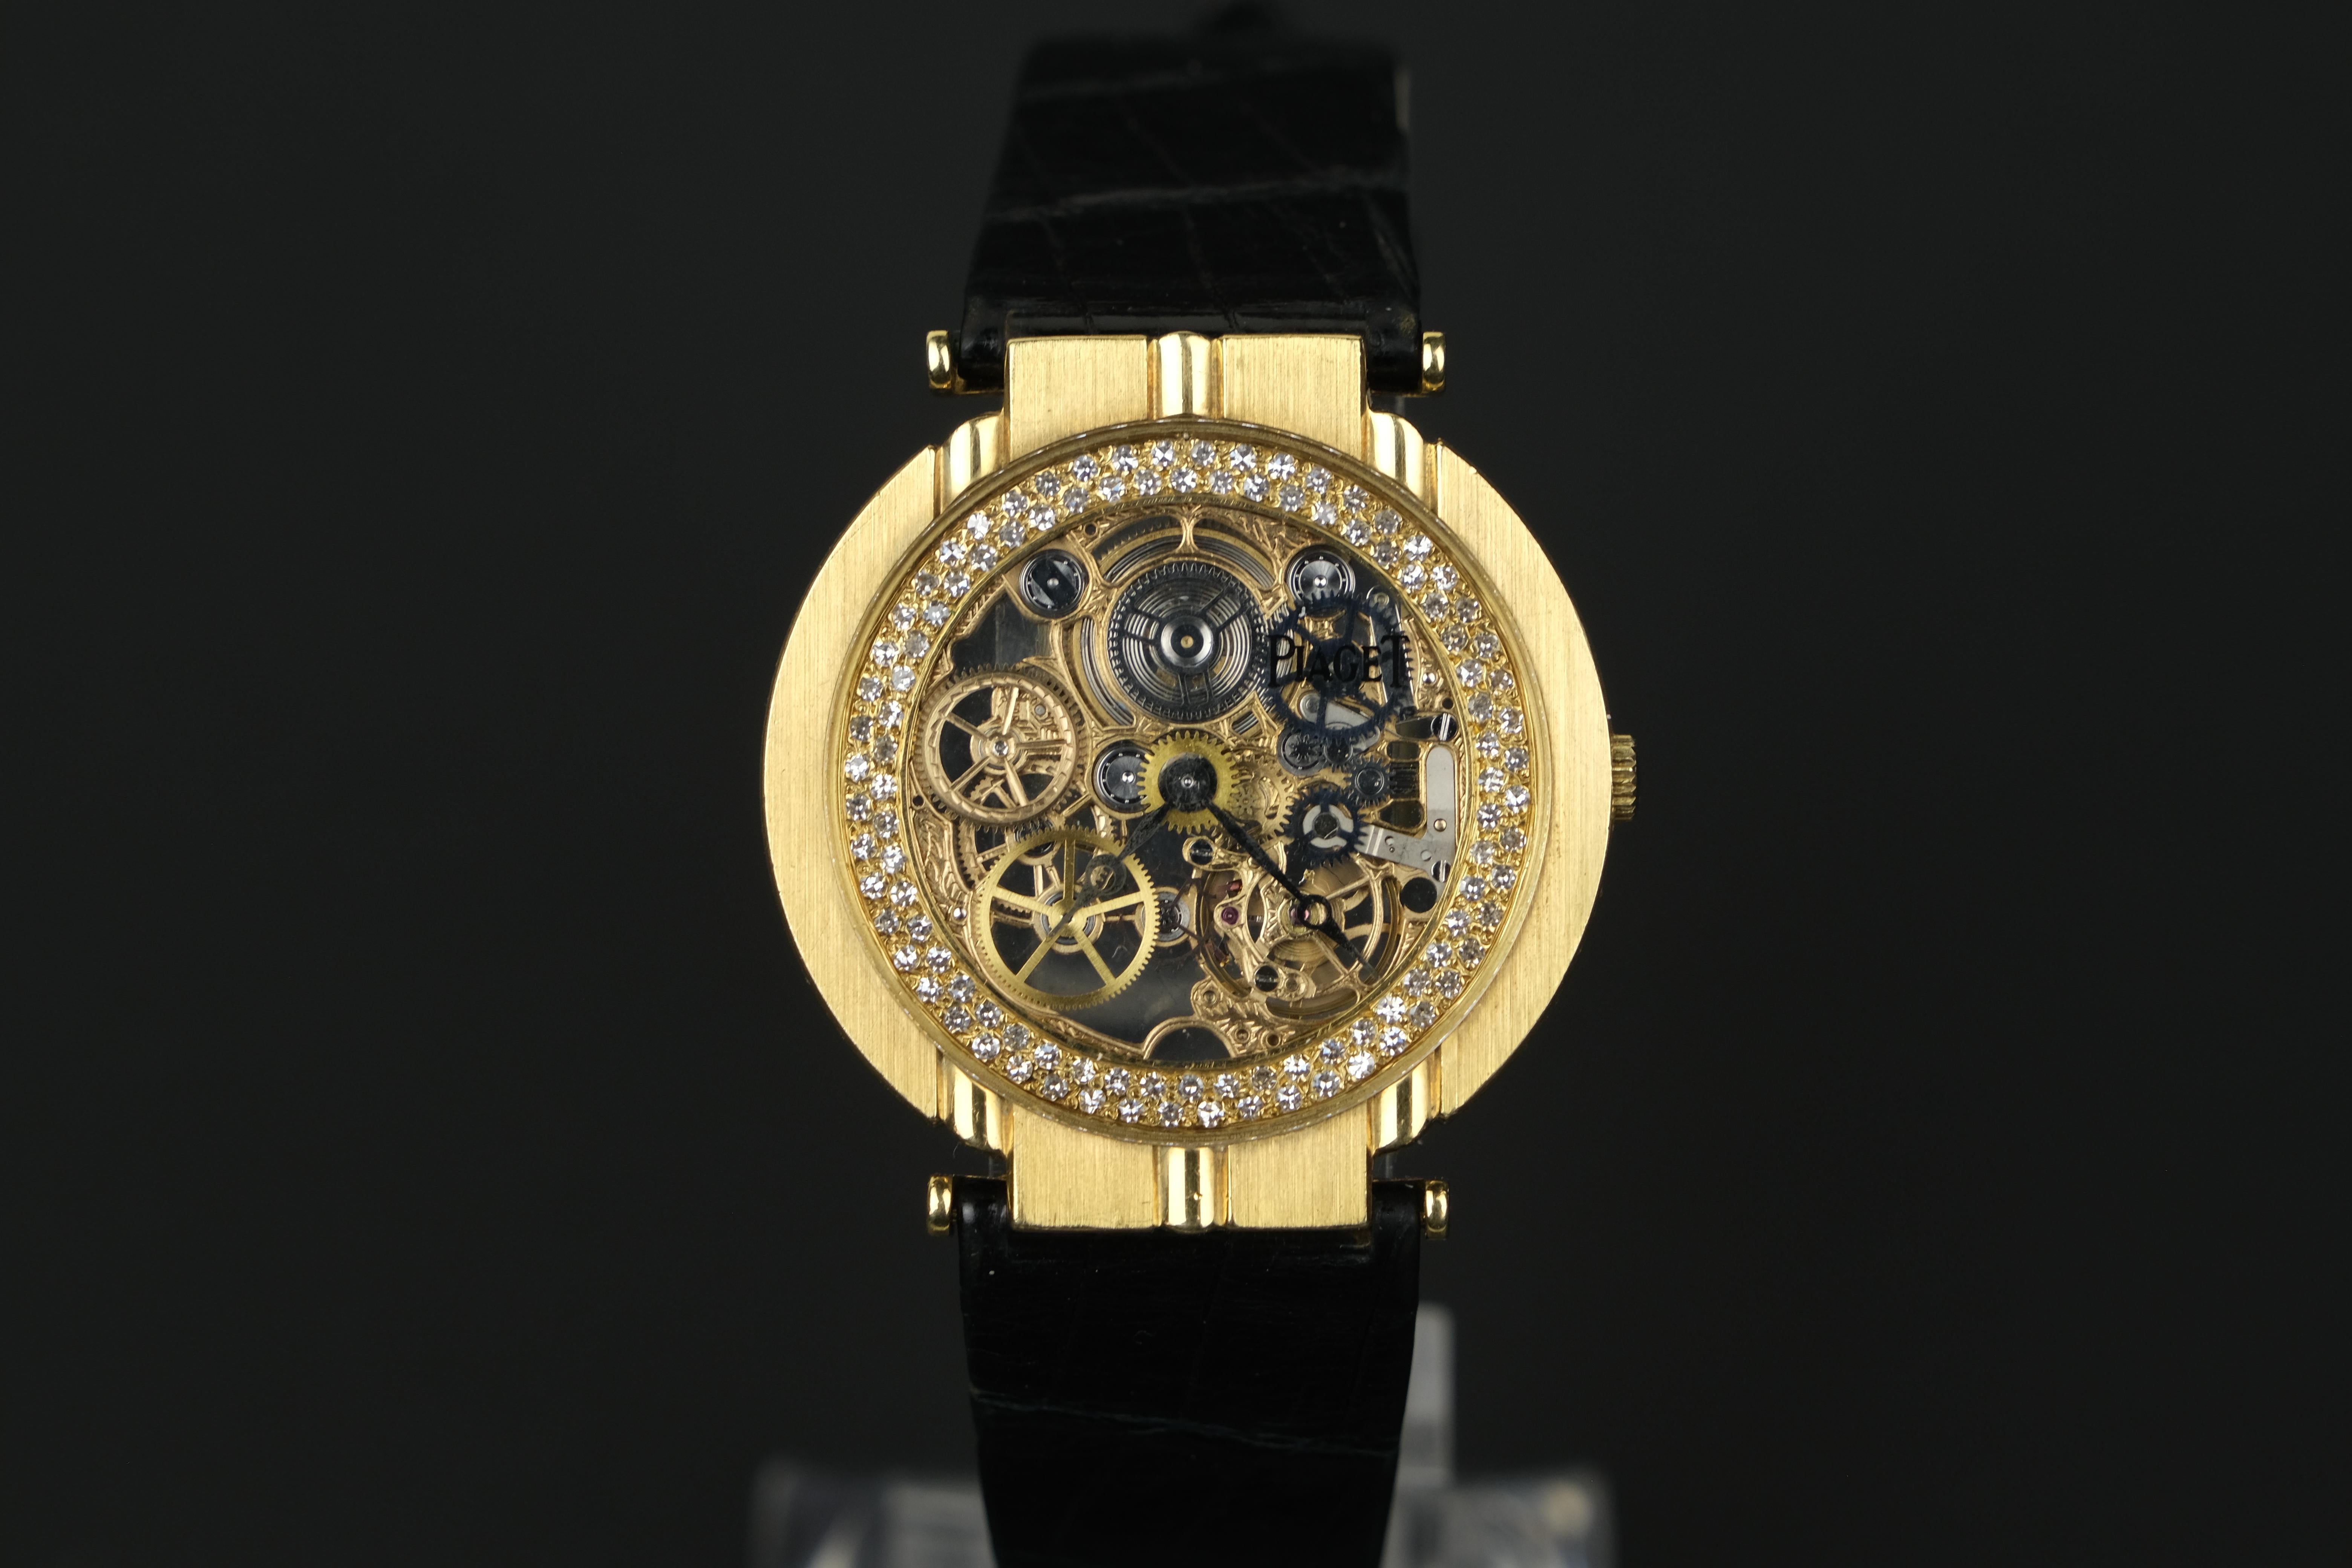 Vintage Piaget Polo Skeleton 18K Gold Diamond Stem Wind Wristwatch

Ultra-thin skeletonized movement with engraved bridges and wheels in an 18K yellow gold case with diamonds accentuated edge of the dial. 
Signed Piaget leather and 18K buckle